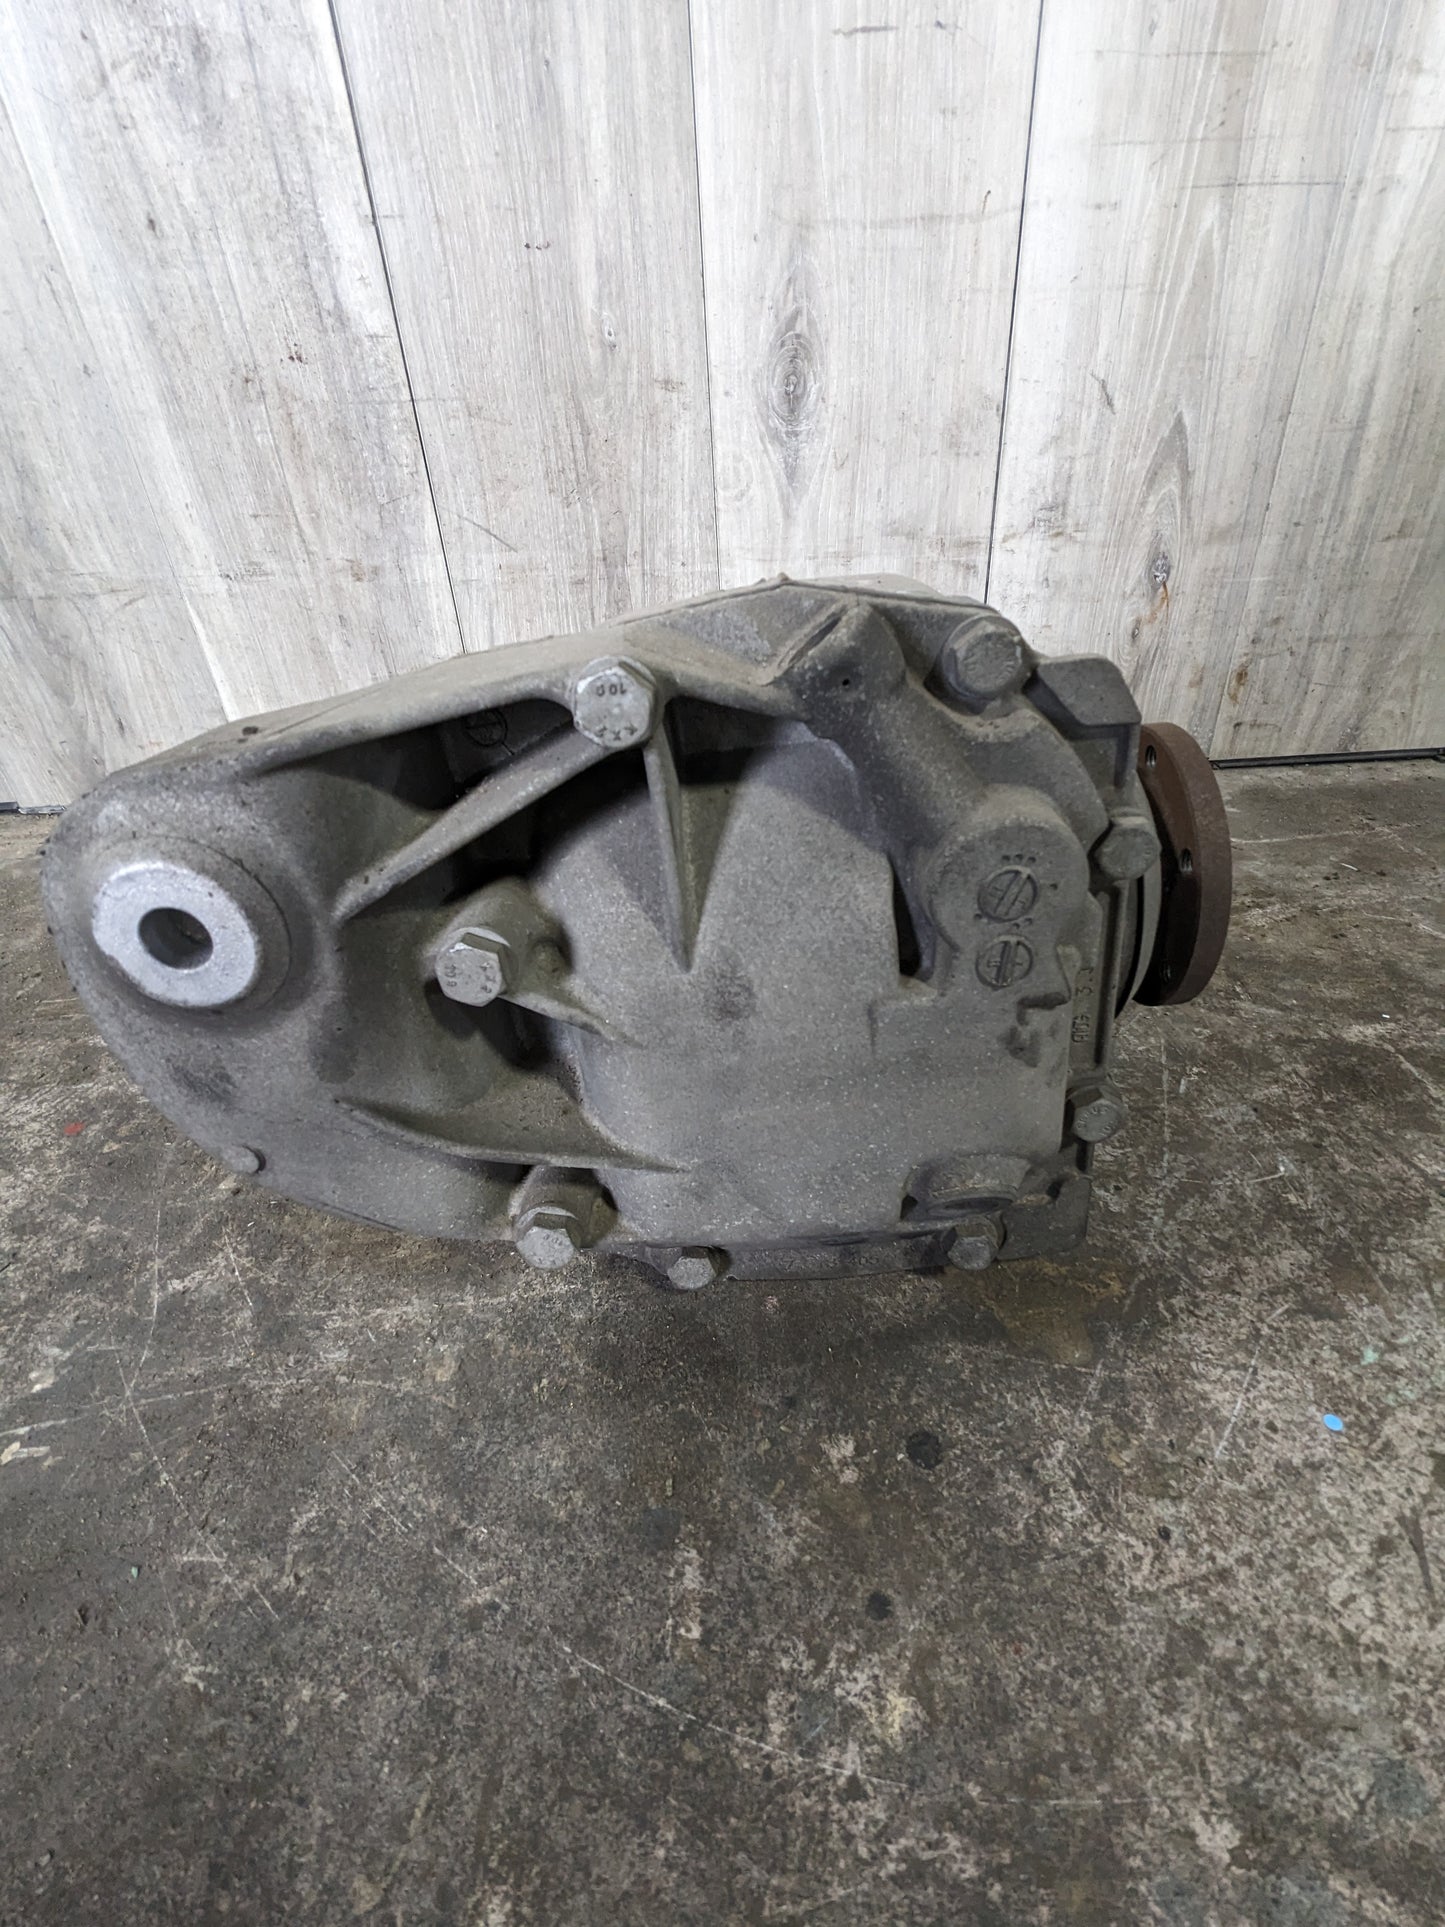 07-13 OEM BMW E82 E90 E92 N54 N55 Automatic Rear Differential Axle Carrier 3.46